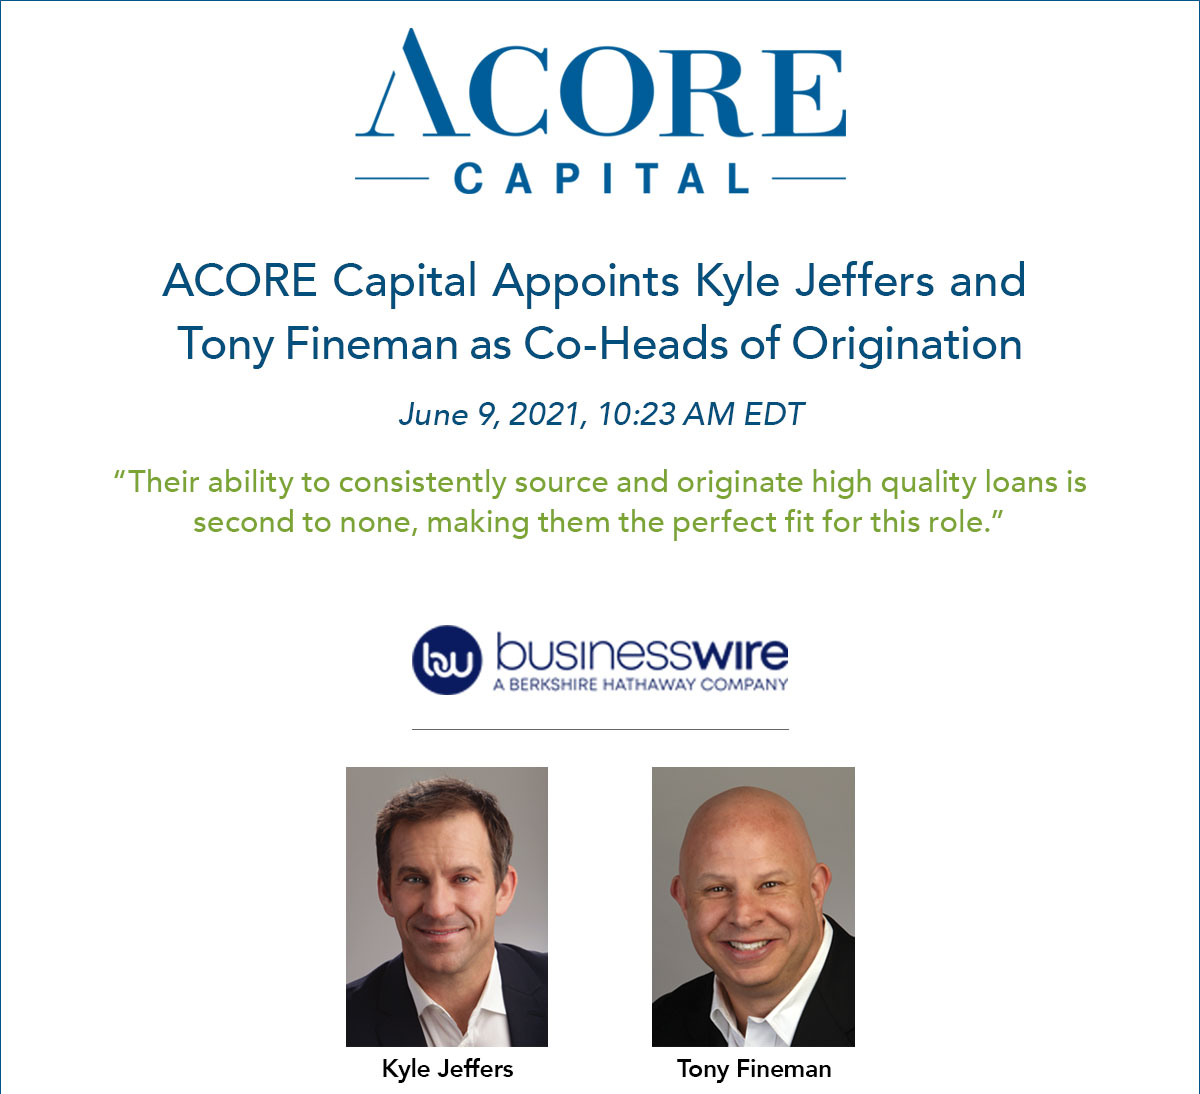 ACORE Capital Appoints Kyle Jeffers and Tony Fineman as Co-Heads of Origination